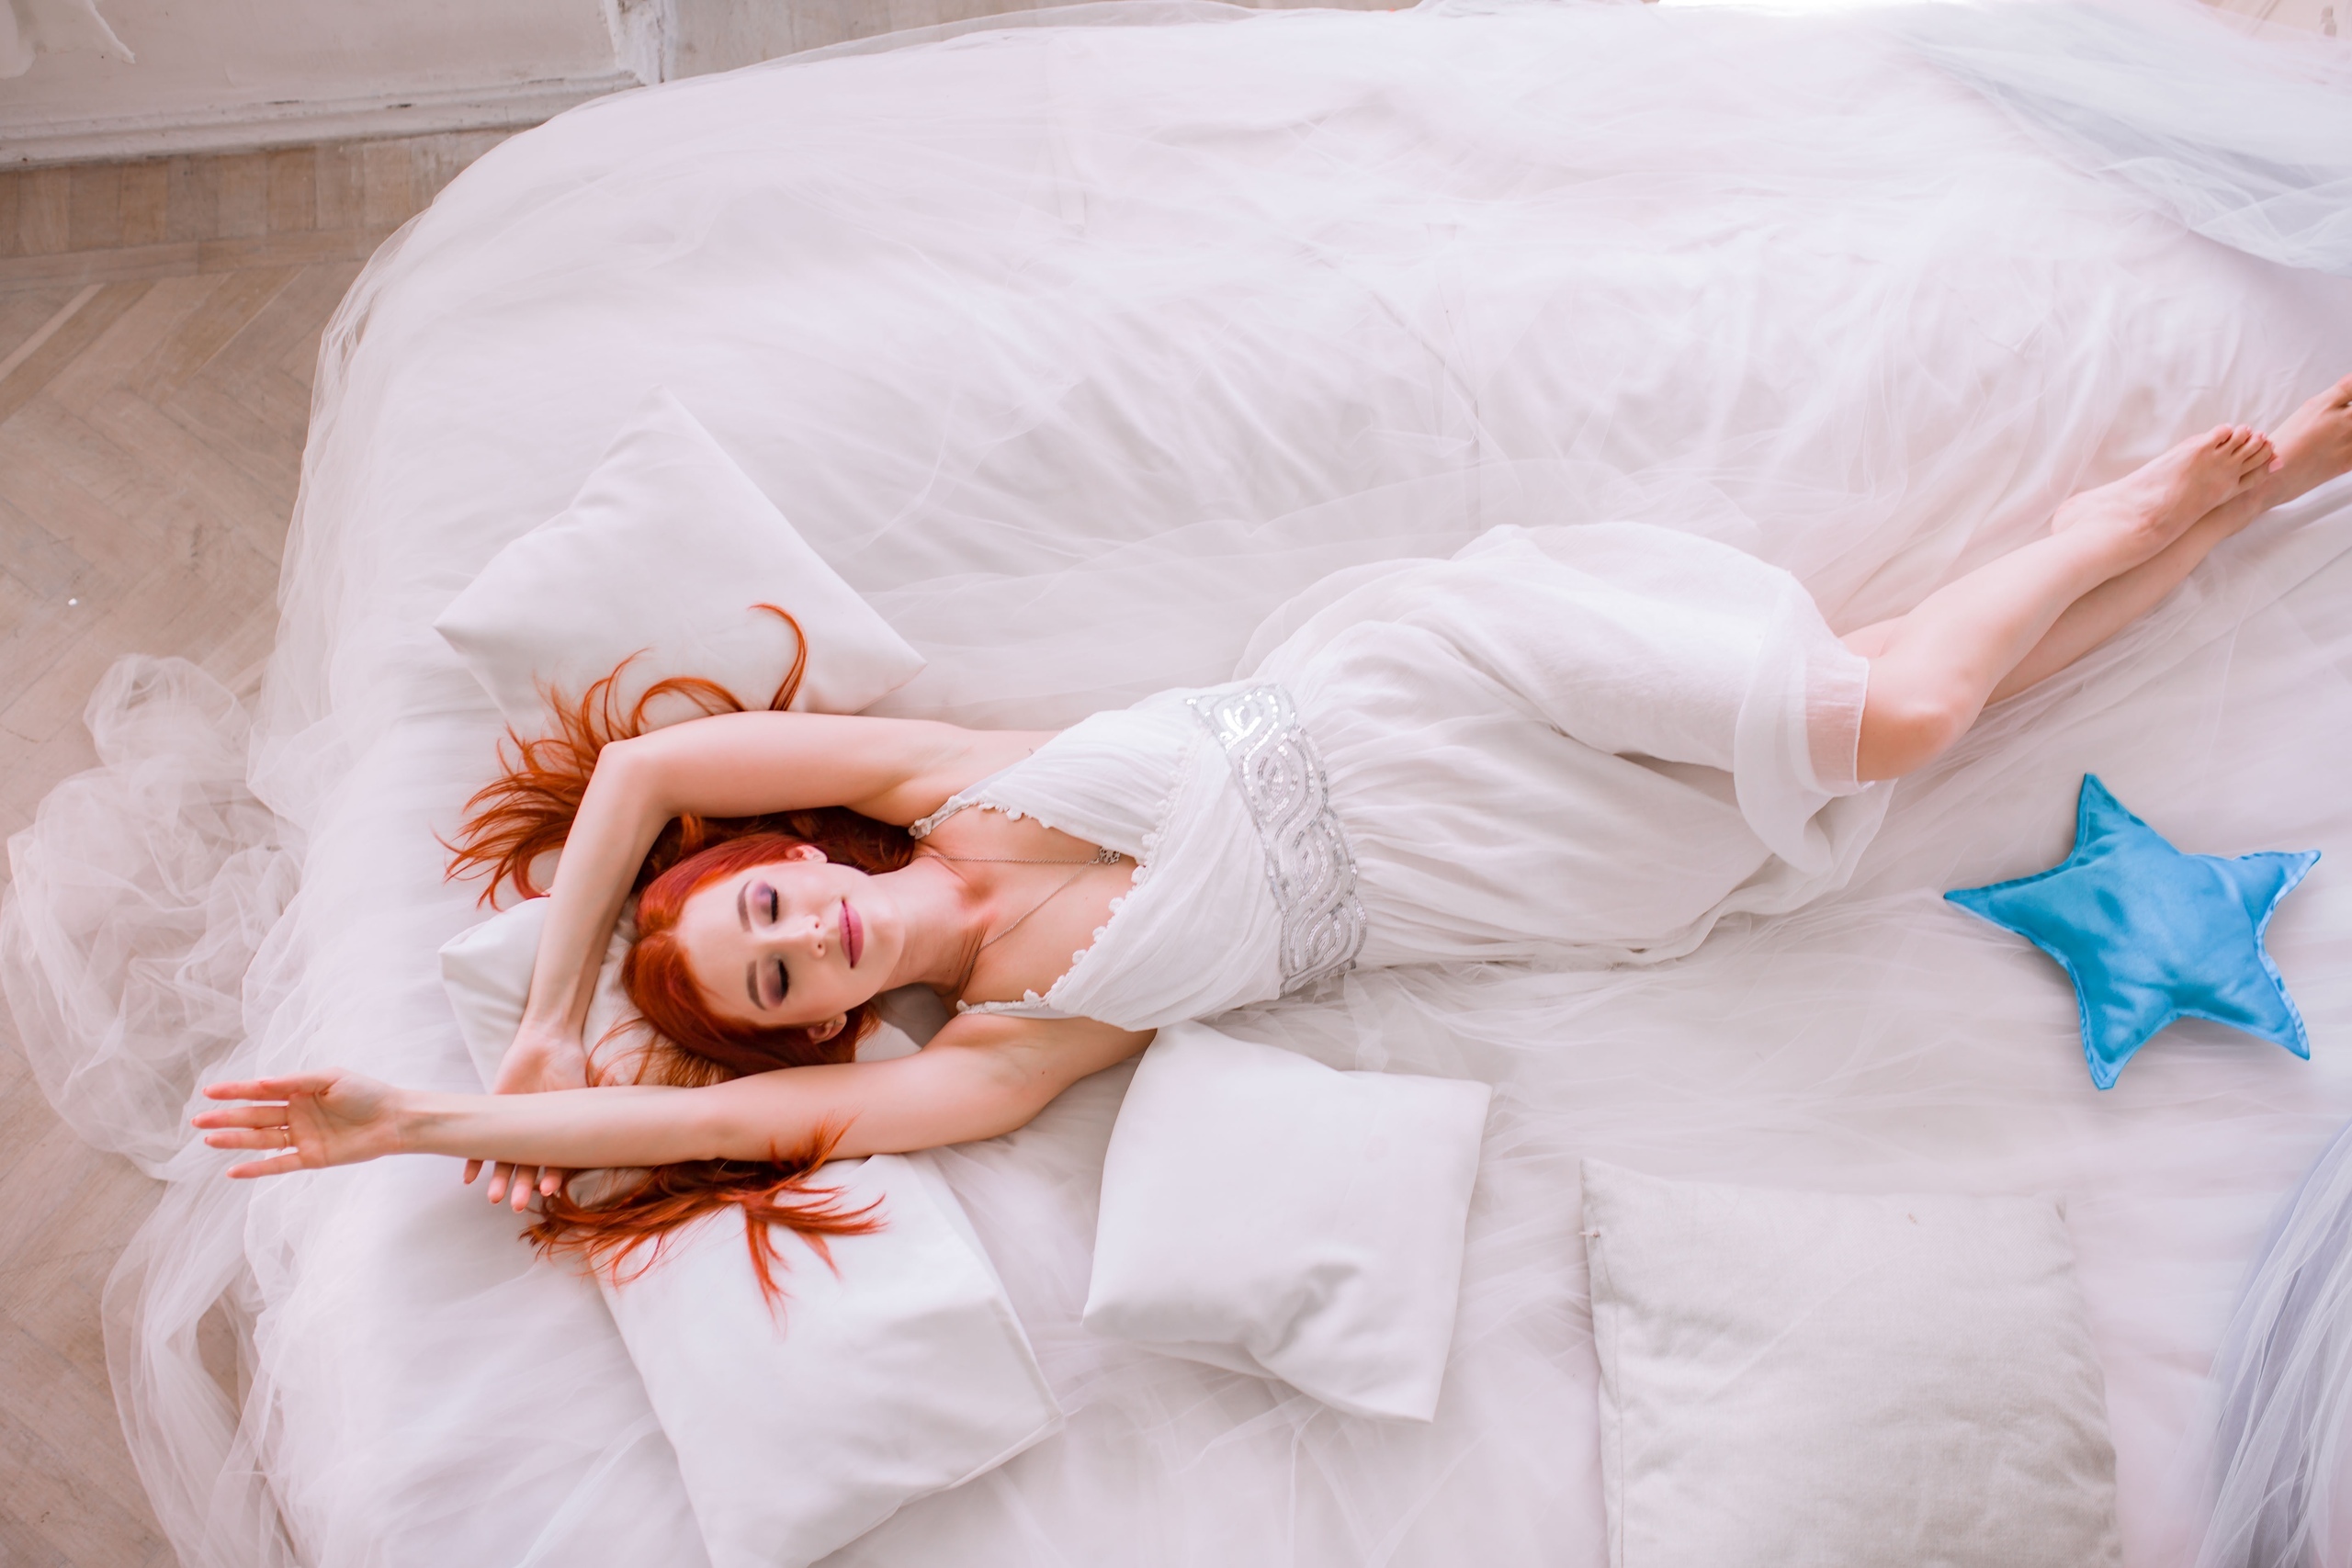 Women Model Redhead Closed Eyes Smiling In Bed Lying On Back